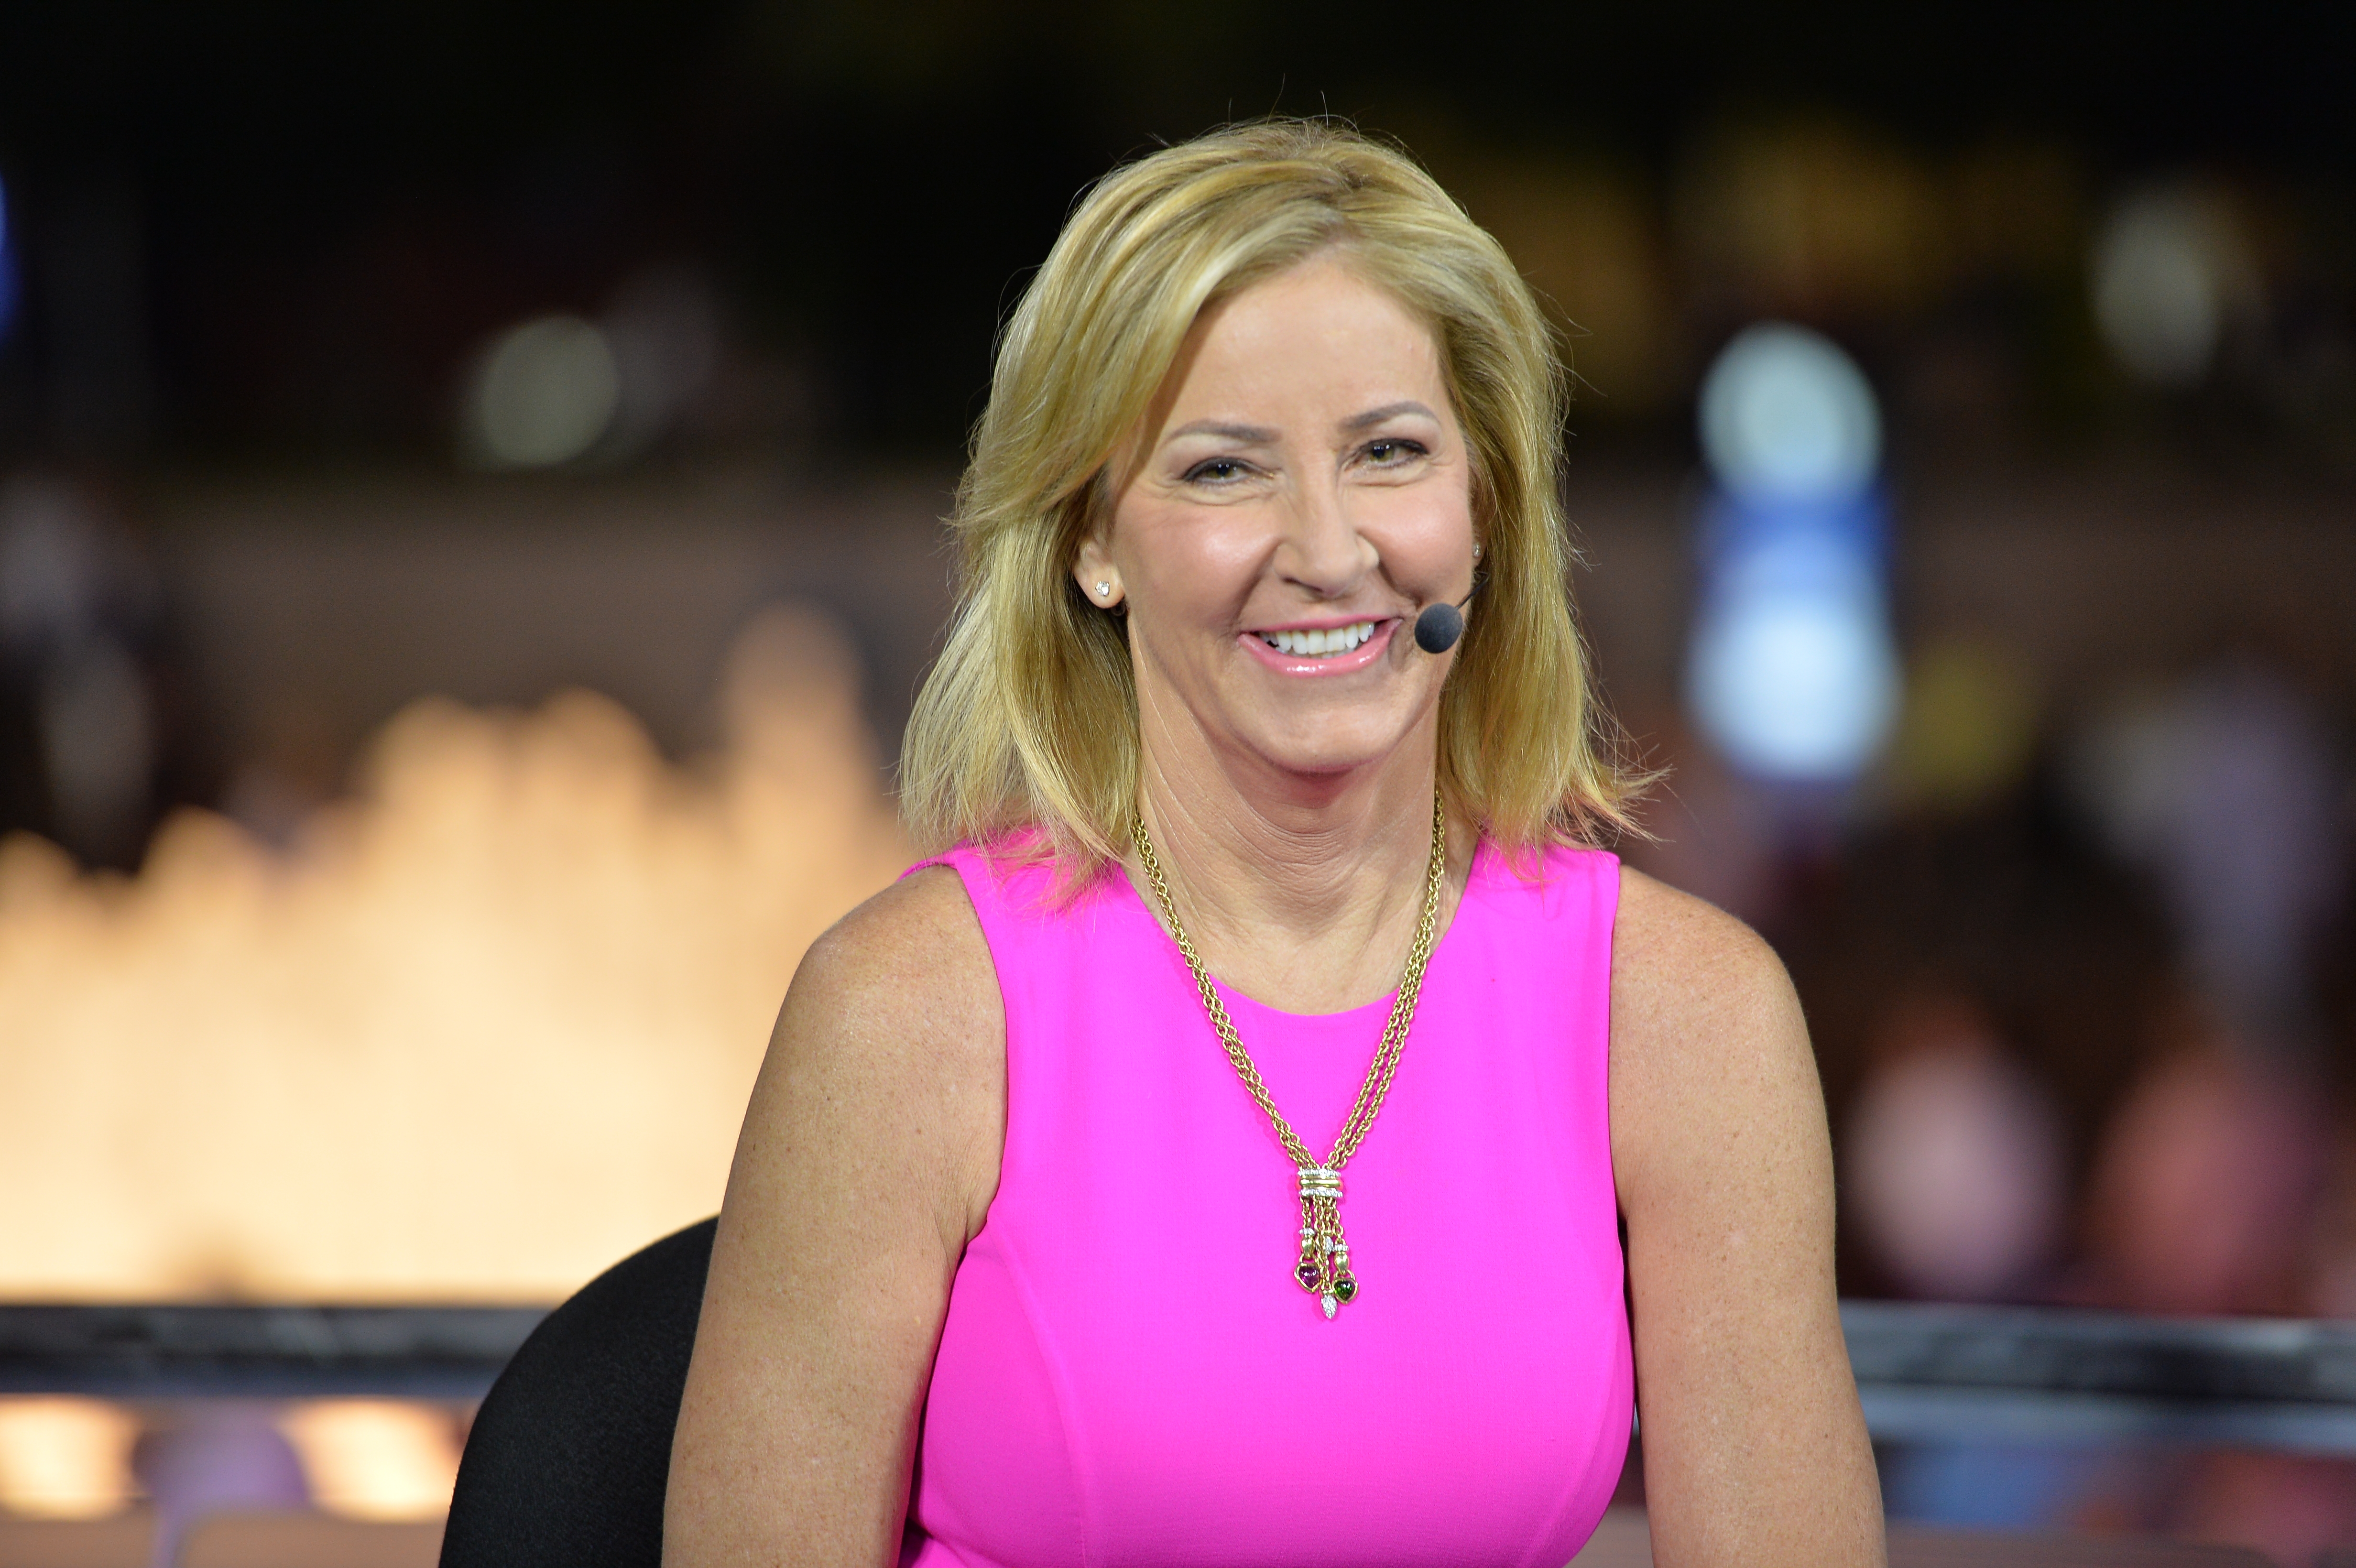 Chris Evert is all smiles during a recent US Open - and in two upcoming mov...